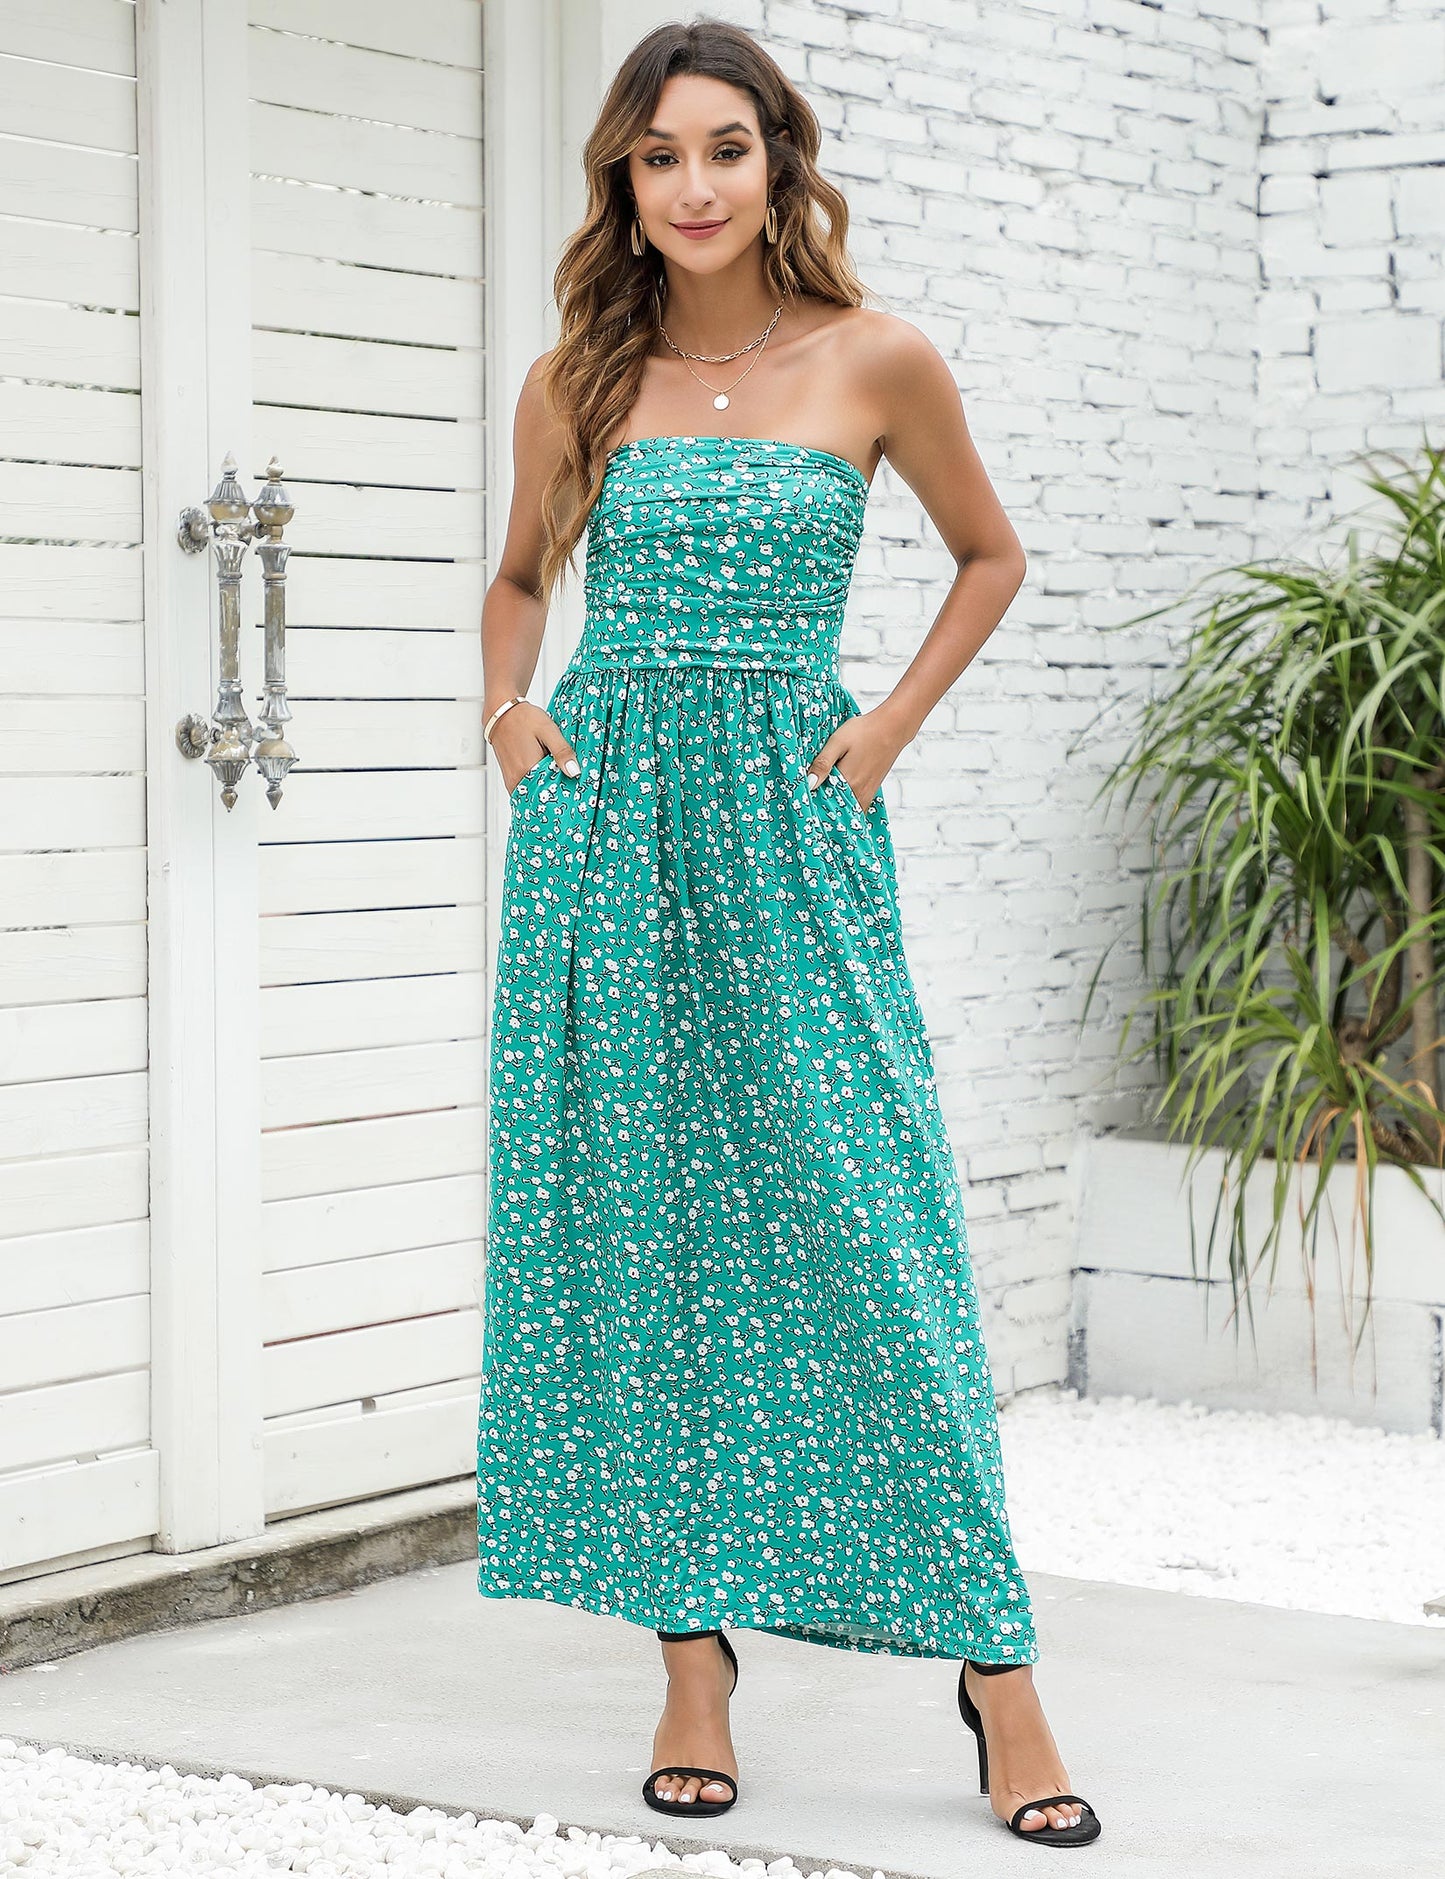 YESFASHION Women's Strapless Graceful Floral Maxi Long Dress